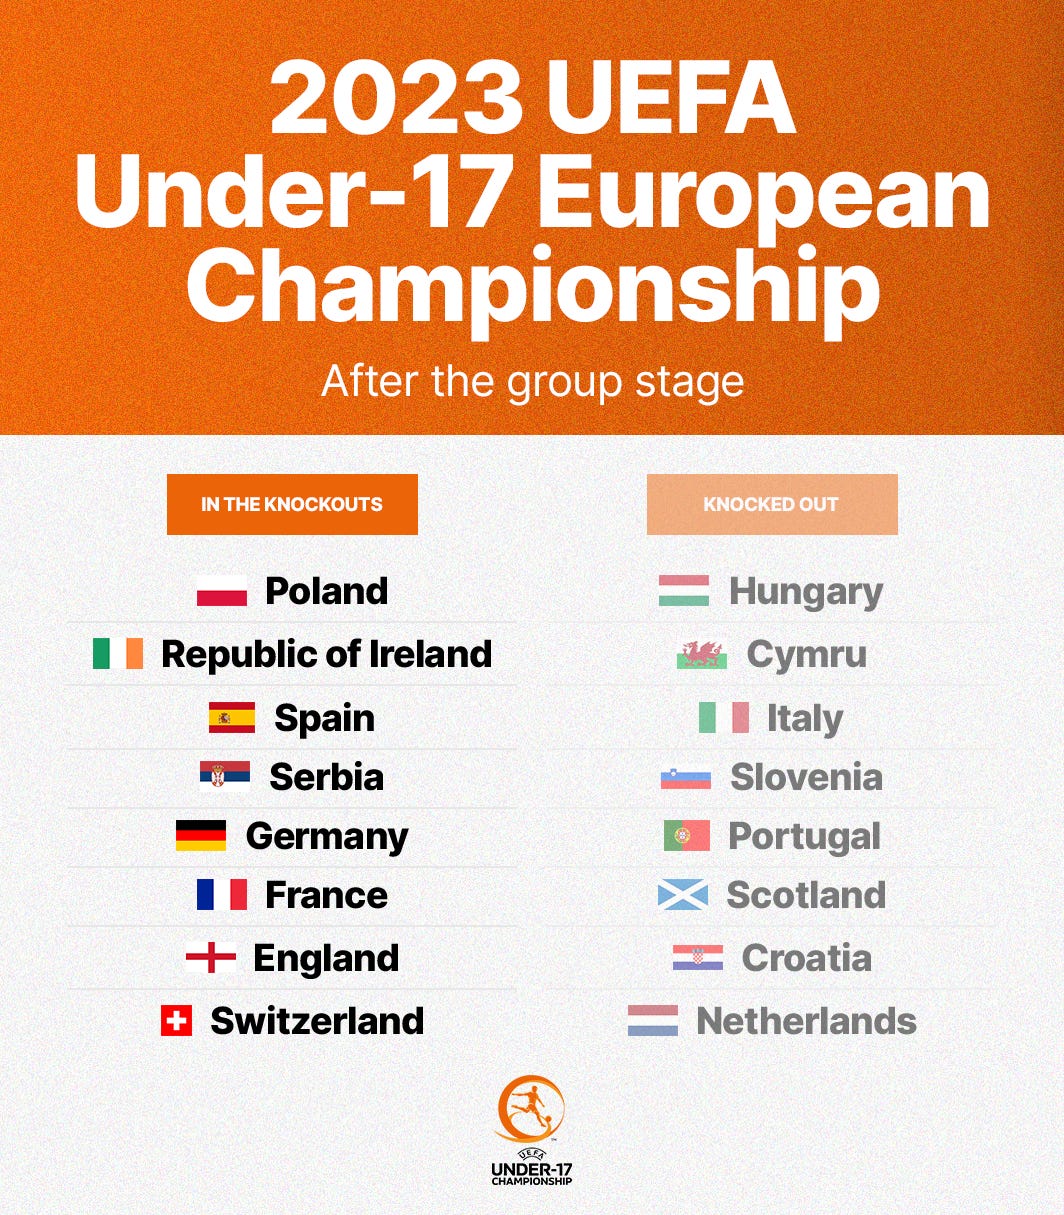 A graphic listing the teams that have qualified to the knockout stages and been knocked out of the 2023 UEFA U-17 European Championship